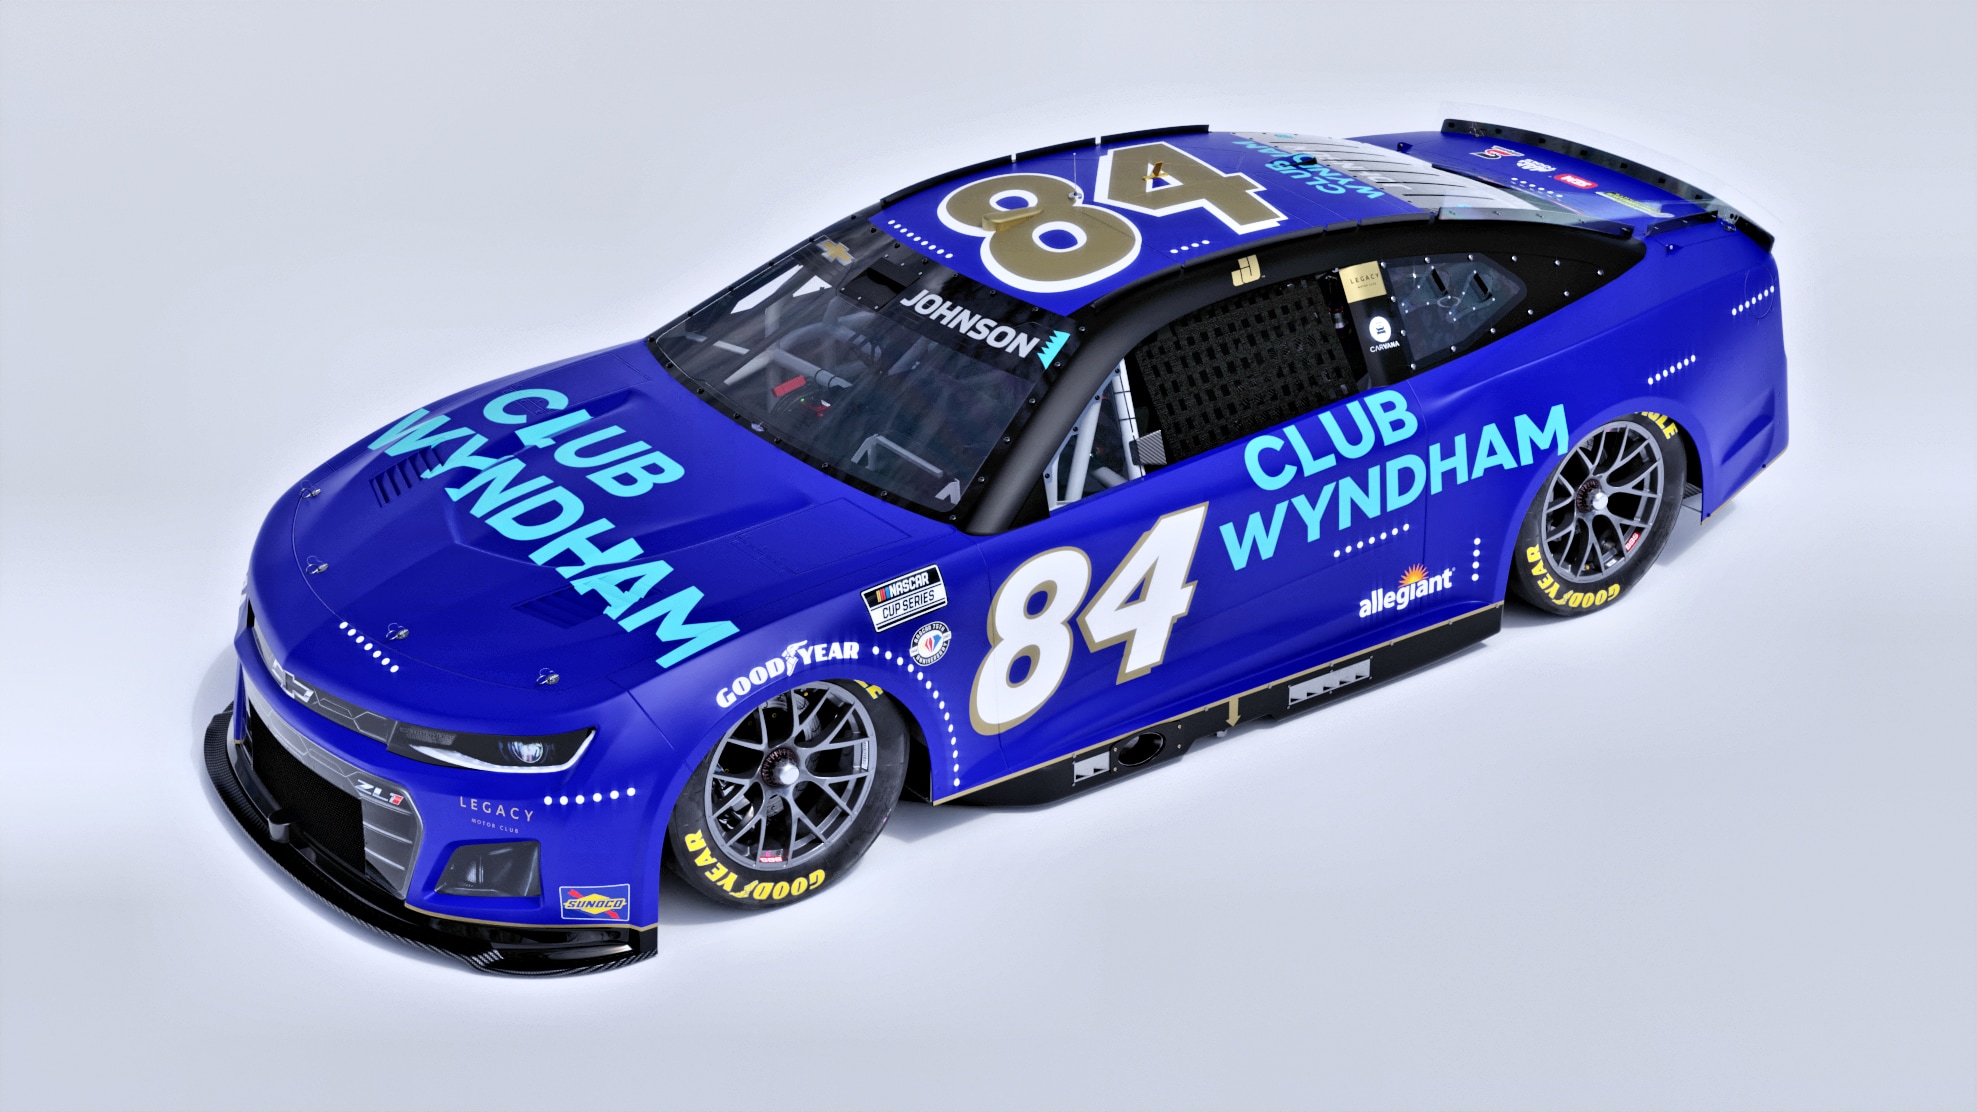 LEGACY MOTOR CLUB Expands Club Wyndham Partnership to include Primary Races on Jimmie Johnsons No